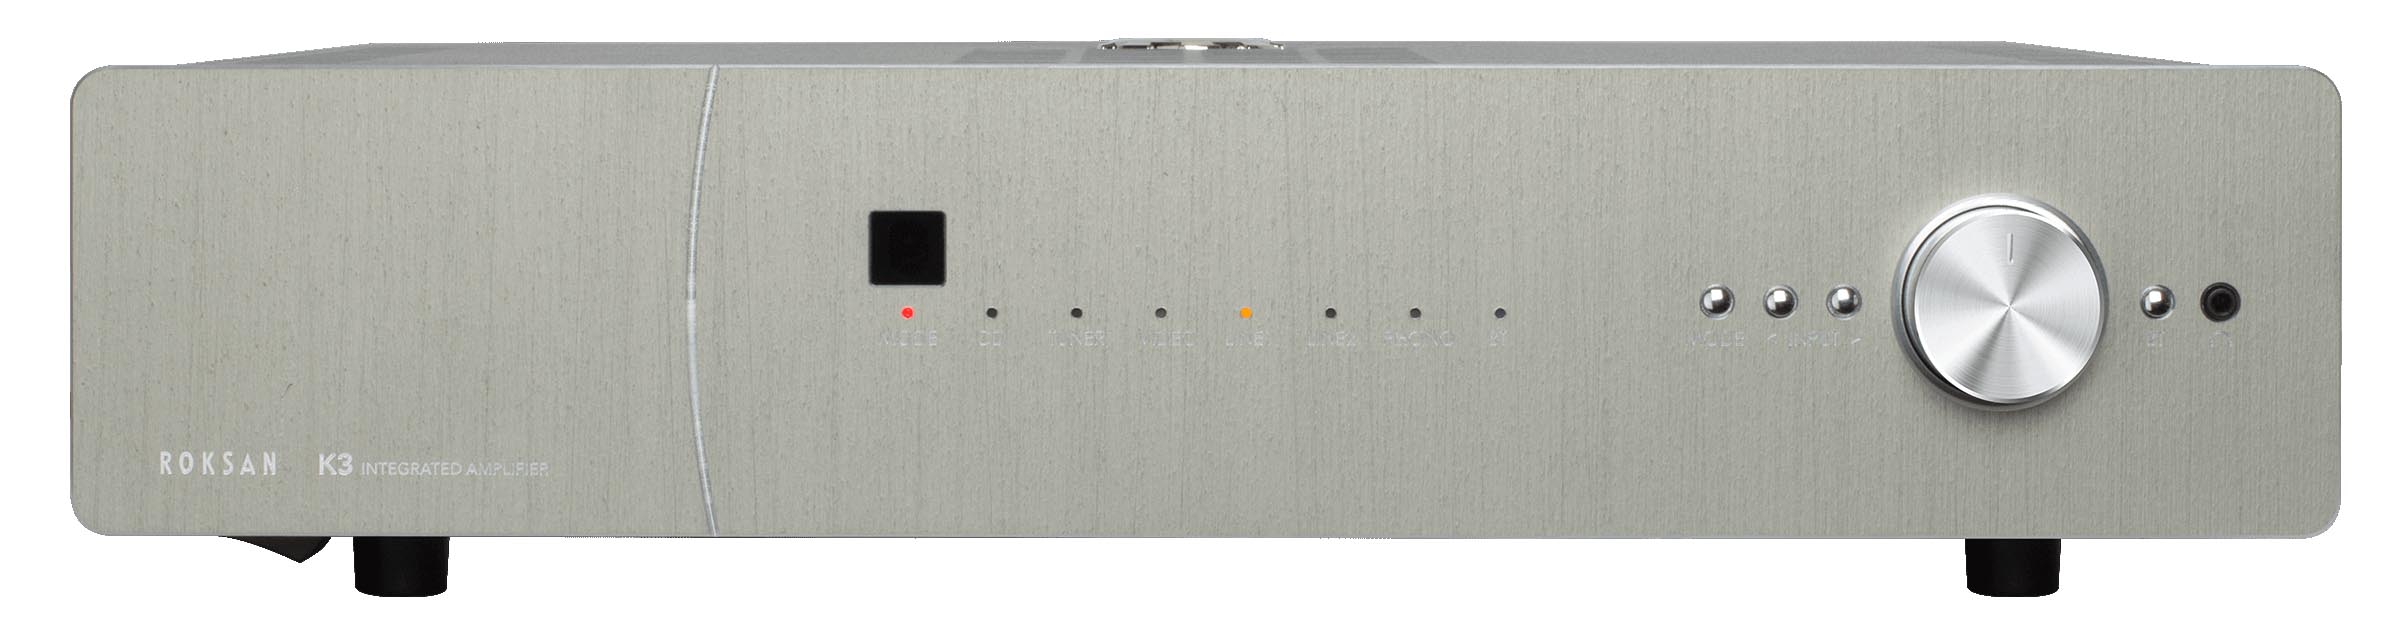 Roksan K3 Integrated Amplifier anthracite